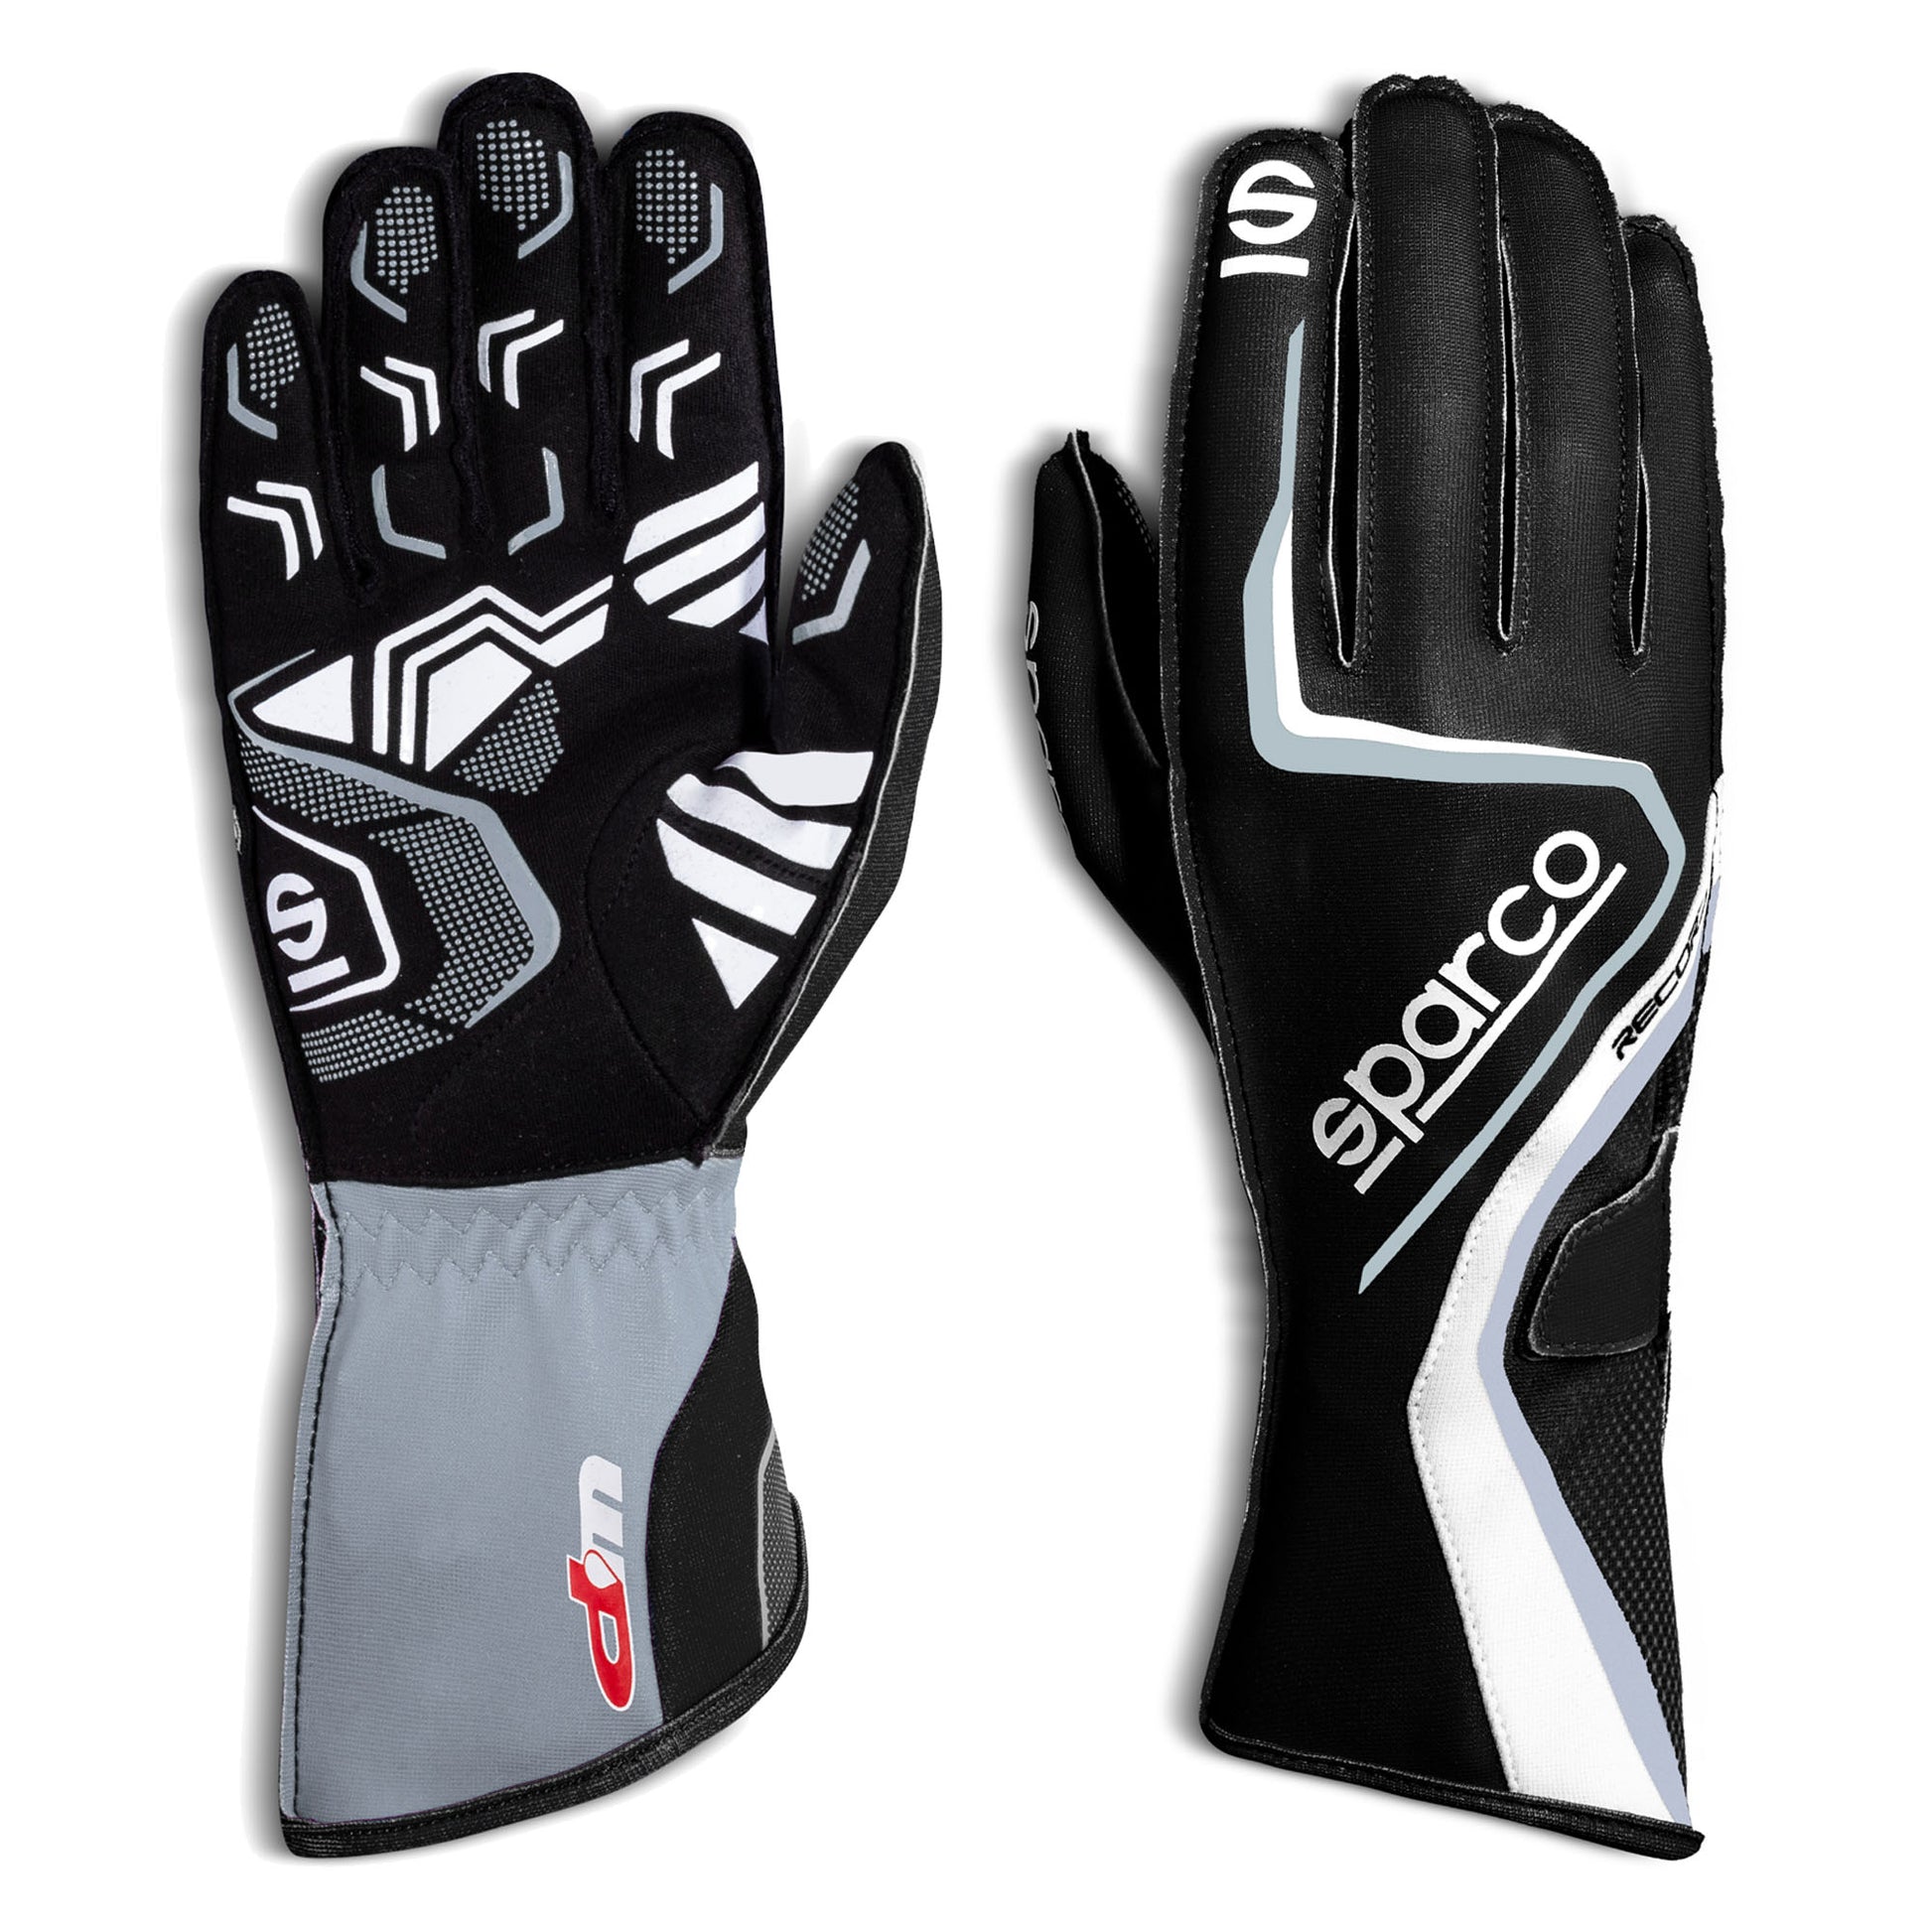 Recently I got these sparco record gloves and tried them once, at